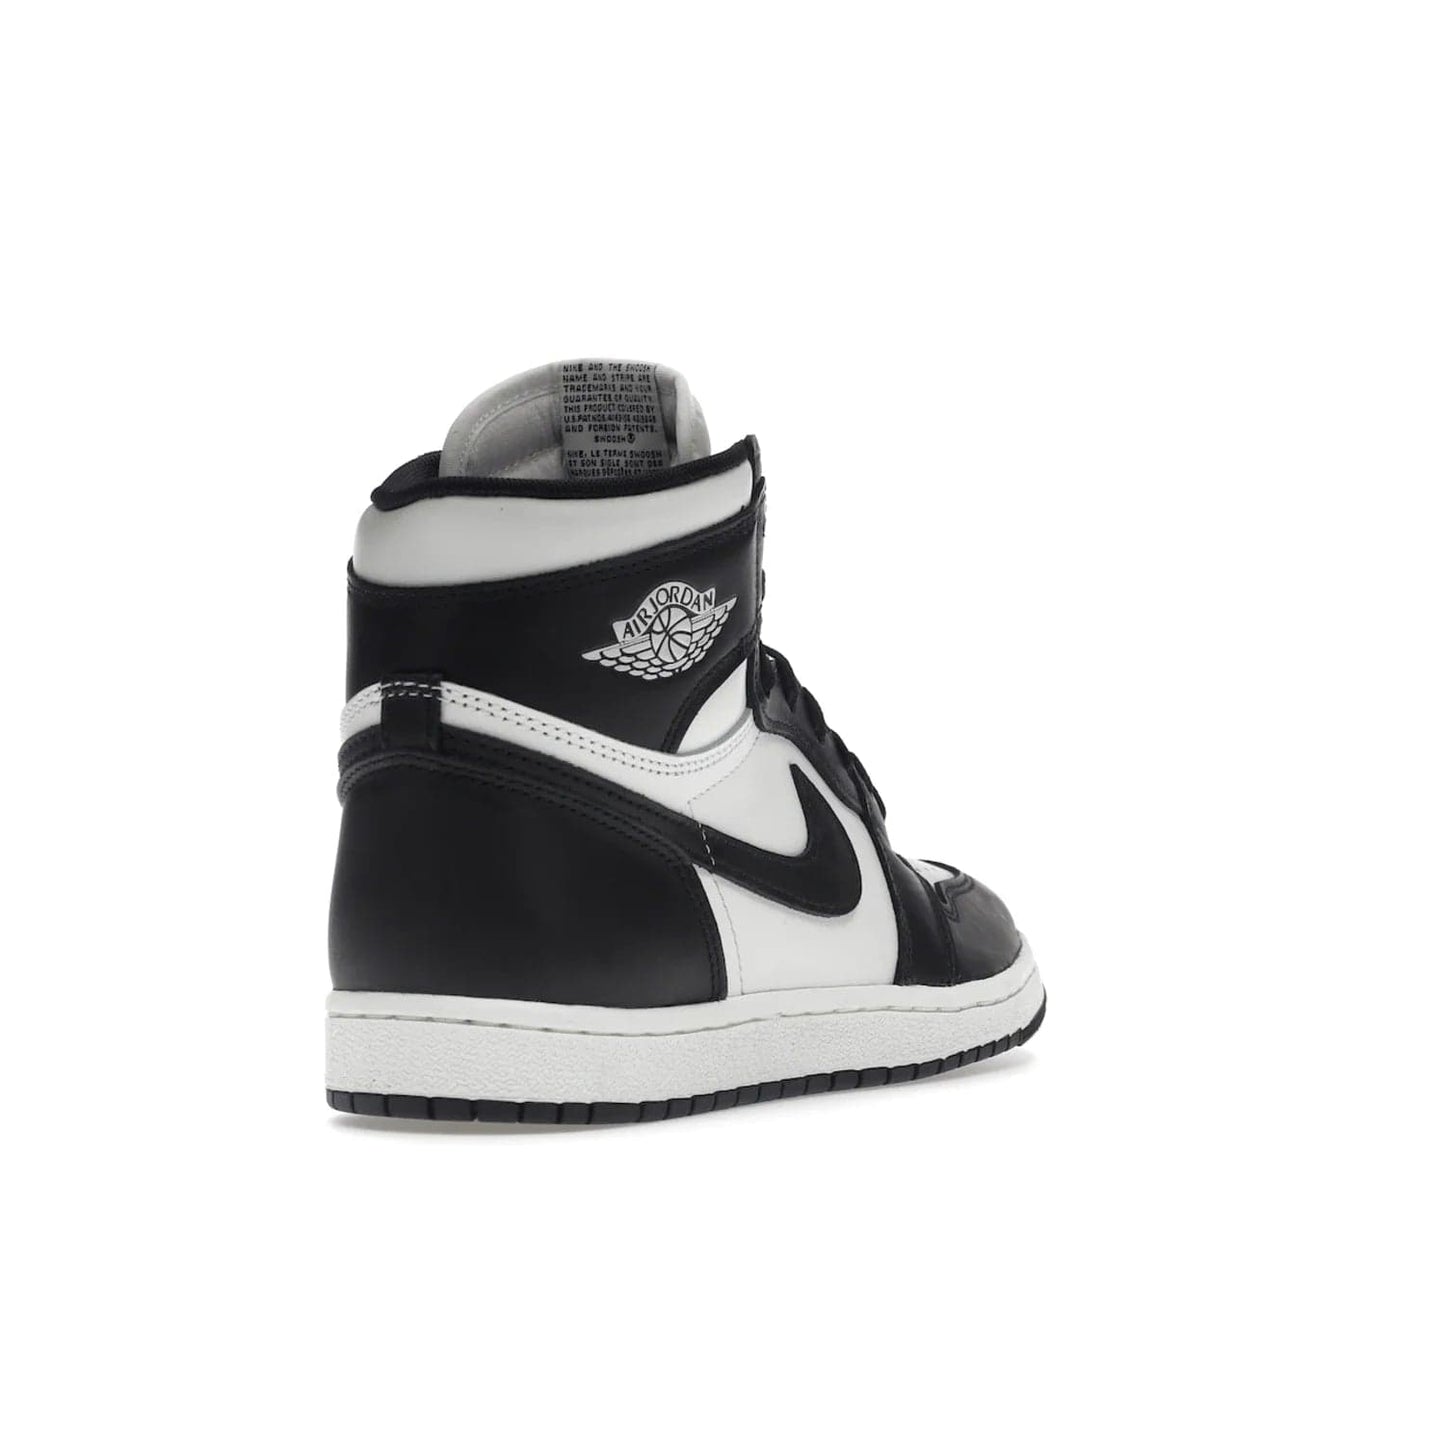 Jordan 1 Retro High 85 Black White (2023) - Image 31 - Only at www.BallersClubKickz.com - Brand new Jordan 1 Retro High 85 Black White (2023) now available. A classic color scheme of black and white leather uppers with signature Nike Air logo on the tongue. Must-have for any Air Jordan fan. Available February 15, 2023.